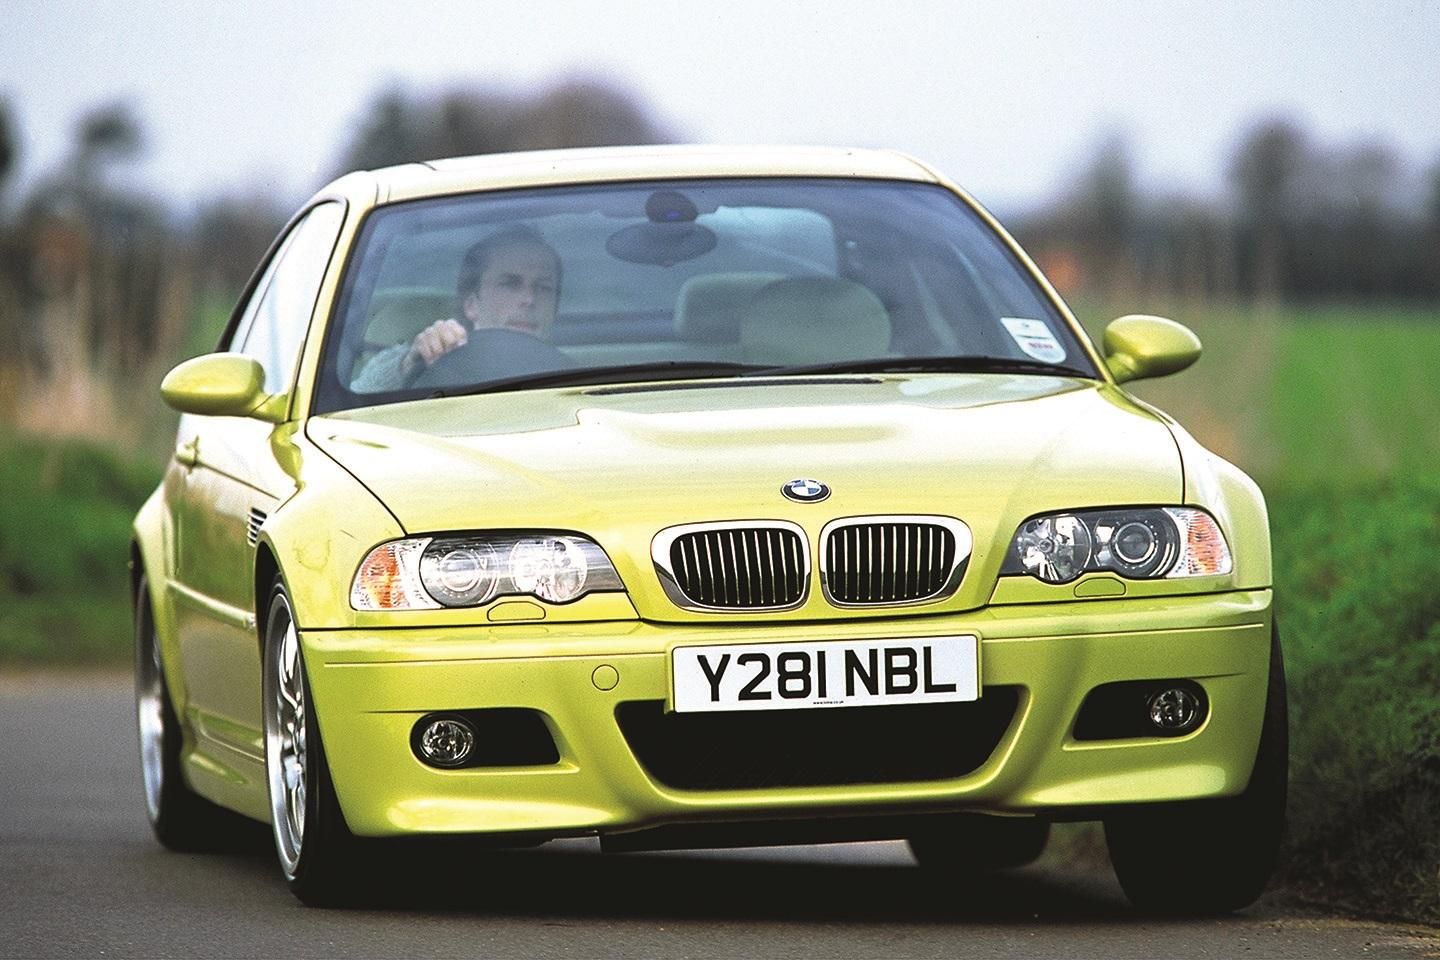 BMW E46 M3 Buyer's Guide: 10 Things You Need To Know